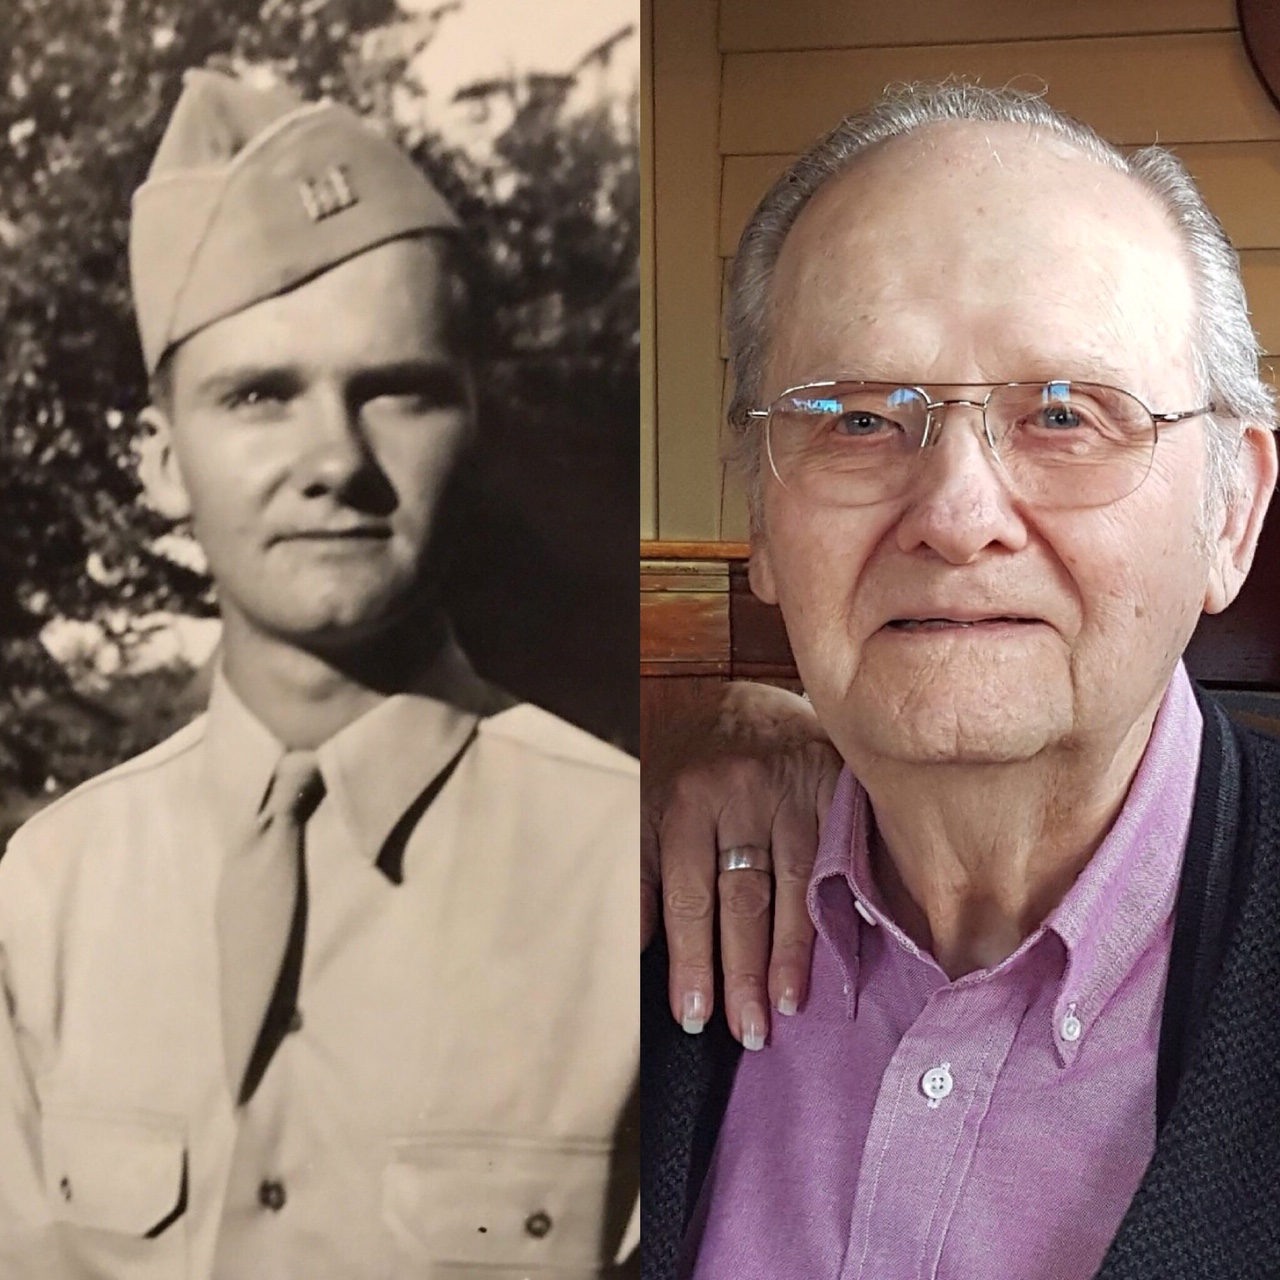 Army Pic 1944/Recent Pic 2017